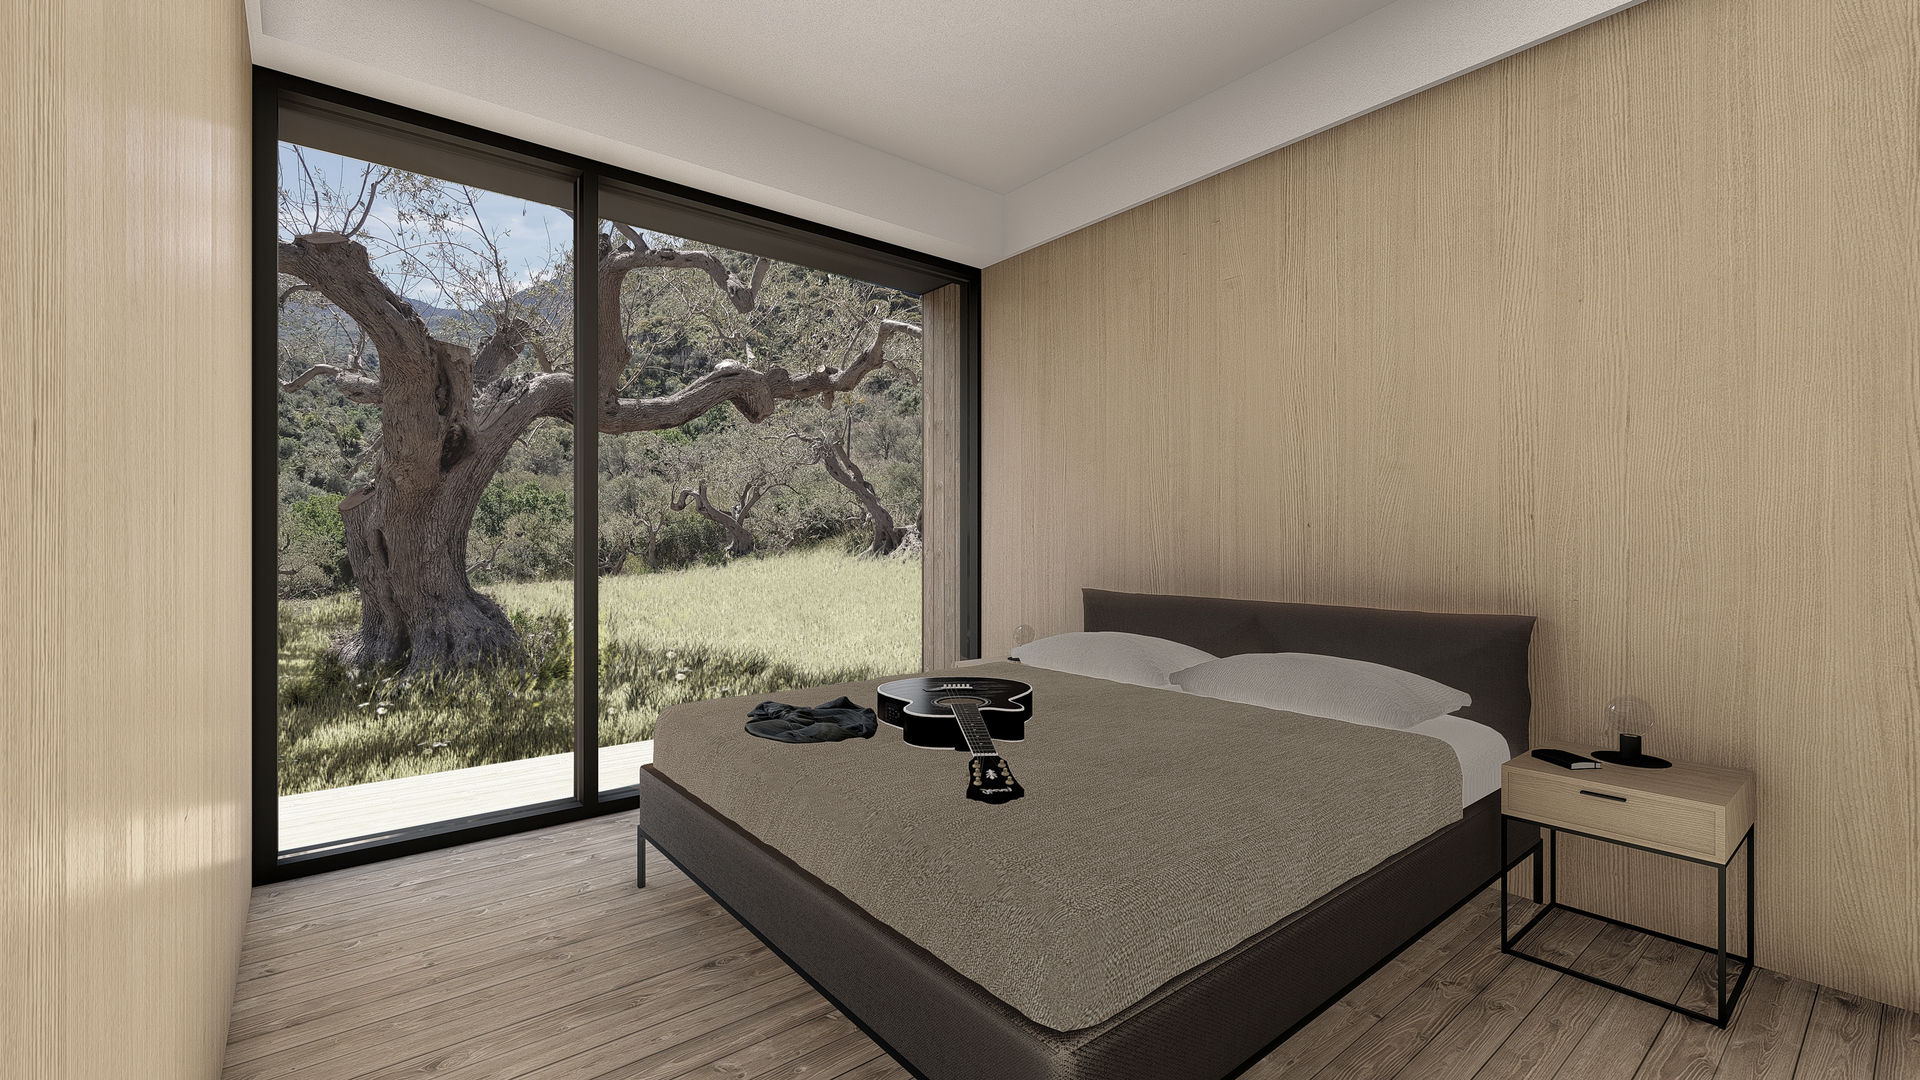 WOODEN HOUSE G|C – SICILY, ALESSIO LO BELLO ARCHITETTO a Palermo ALESSIO LO BELLO ARCHITETTO a Palermo ห้องนอน ไม้ Wood effect king-size bedroom, glass window, room with a view, queen-size bed, double room